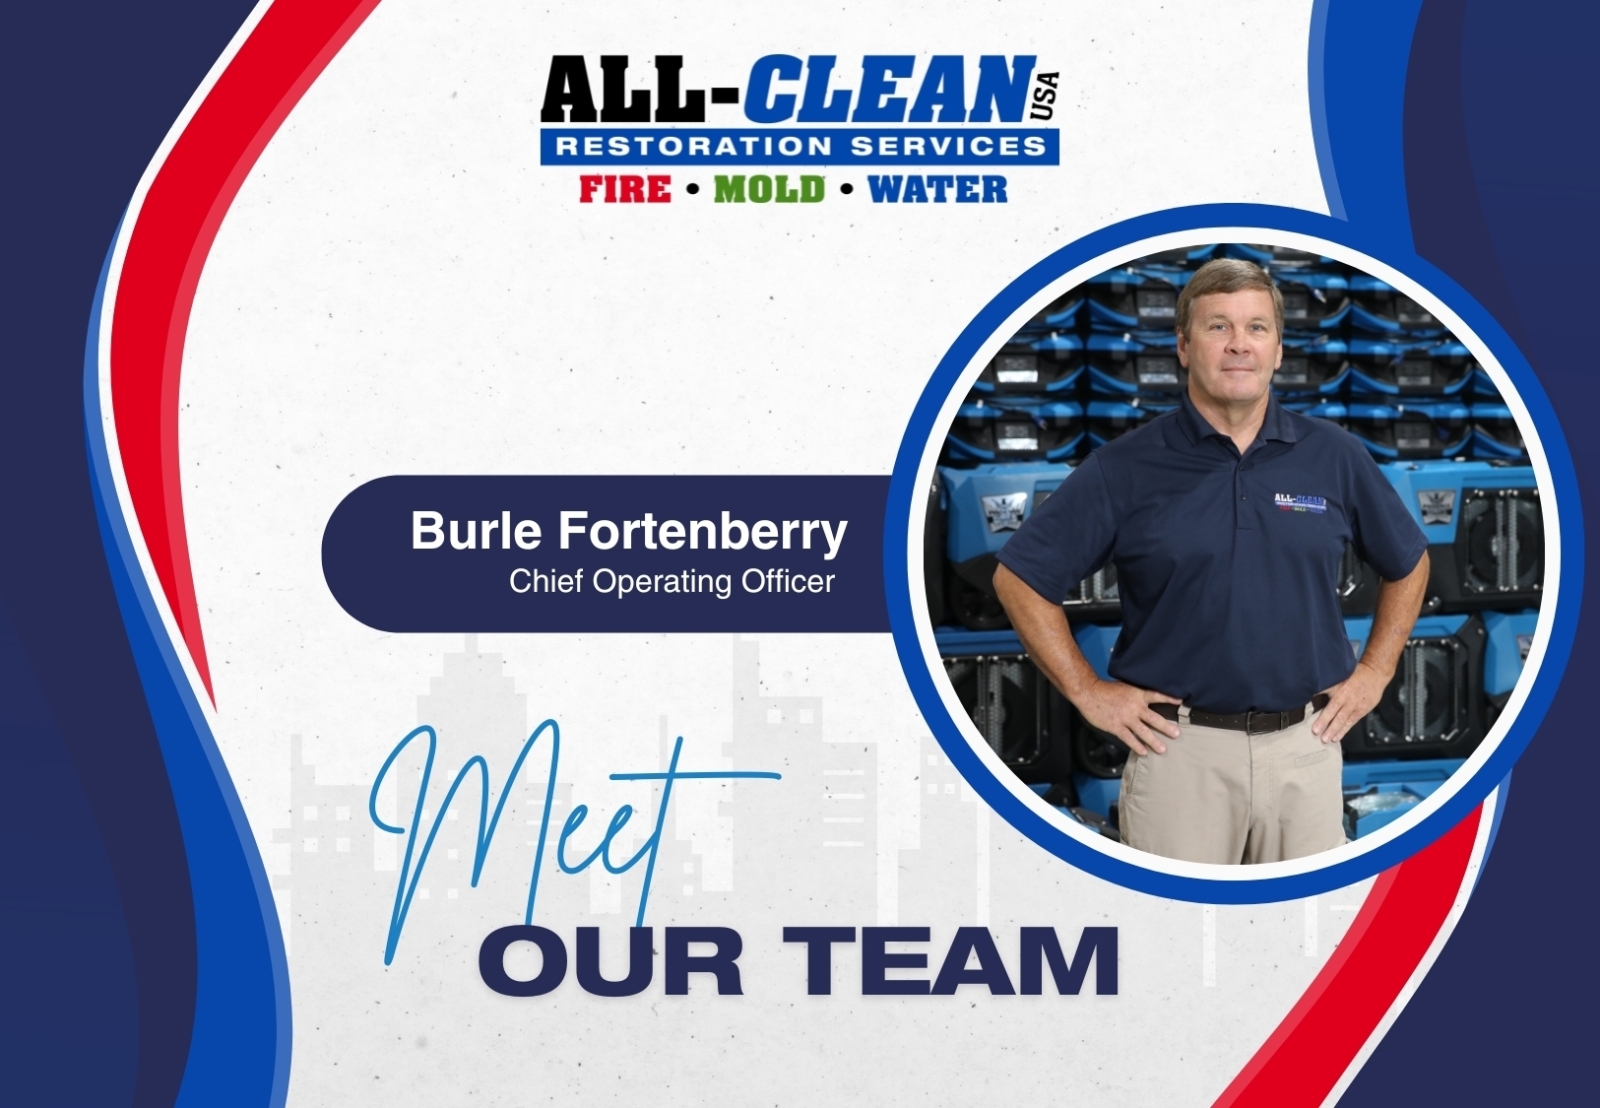 Meet the Team - Introducing Burle Fortenberry